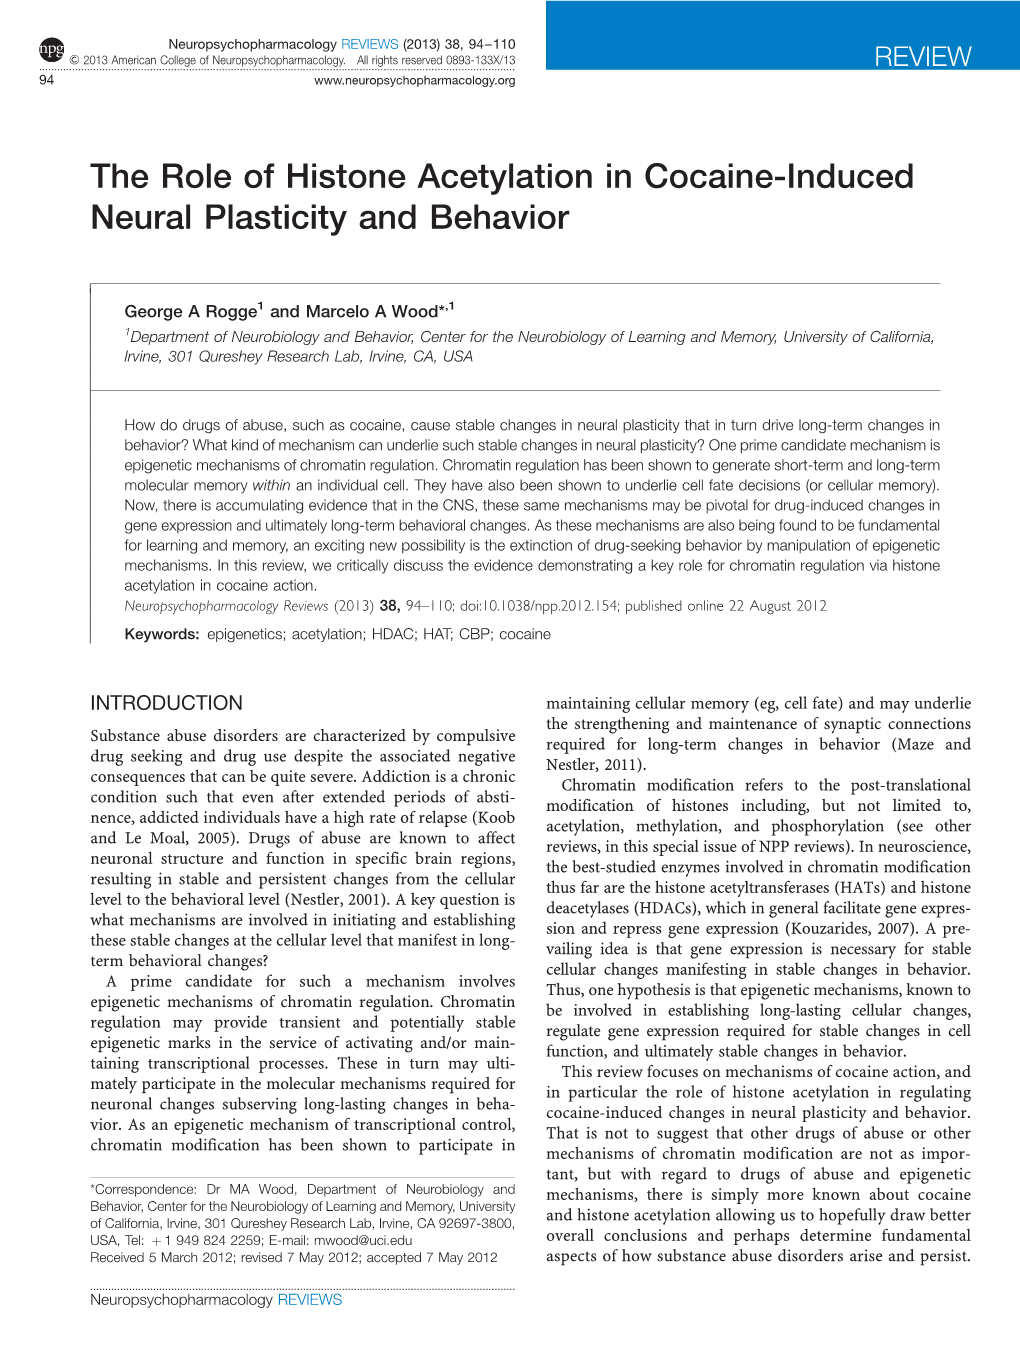 The Role of Histone Acetylation in Cocaine-Induced Neural Plasticity and Behavior